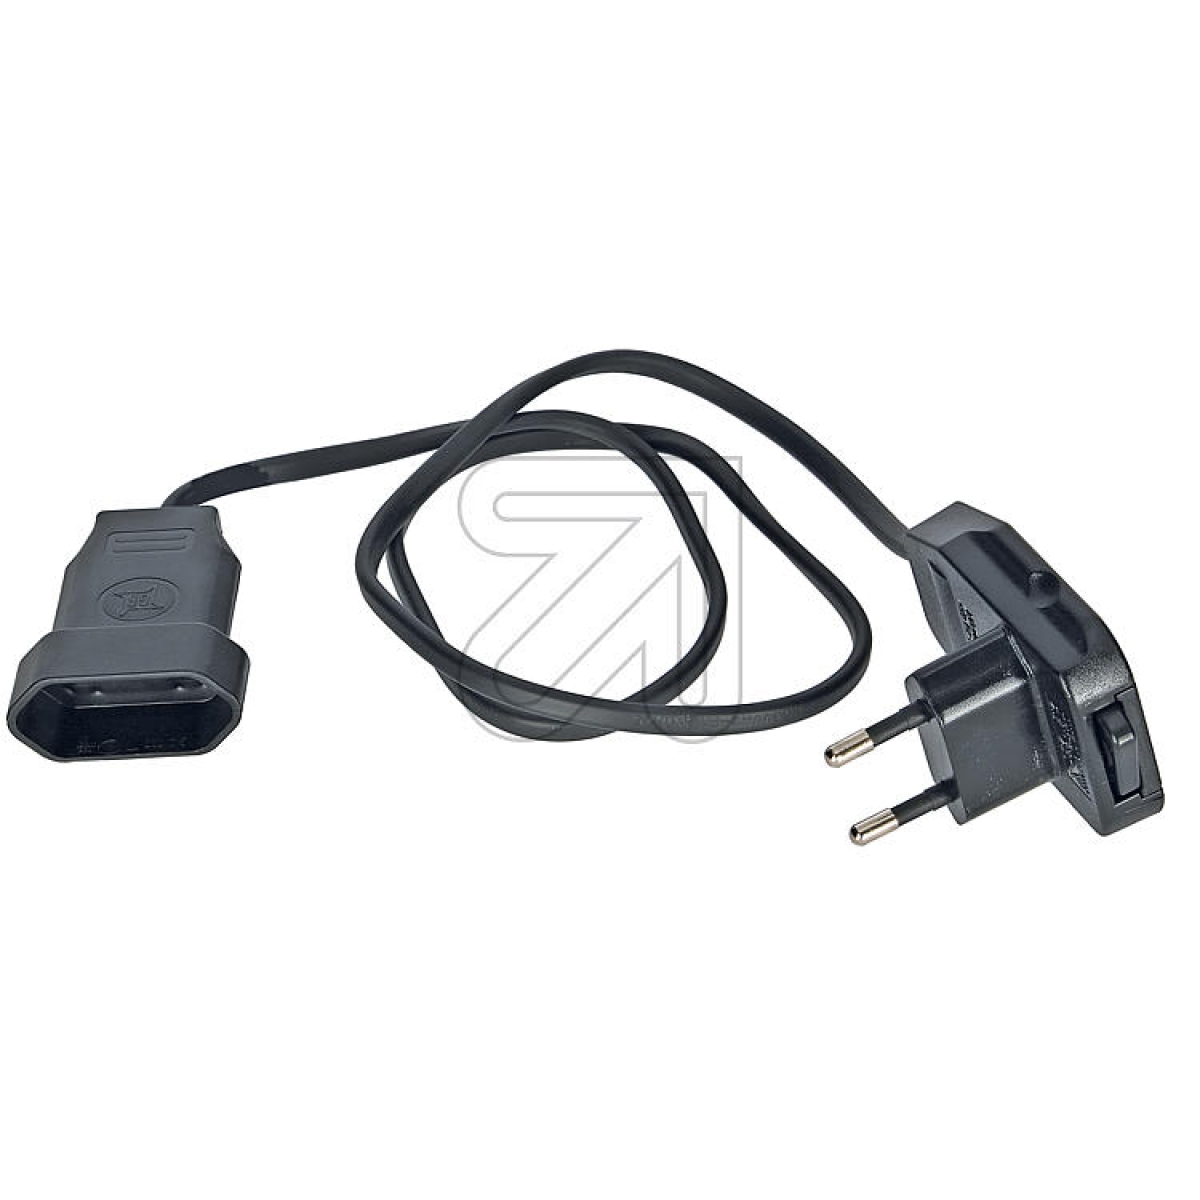 GB GebroEurope extension with switch 0.8m blackArticle-No: 041330